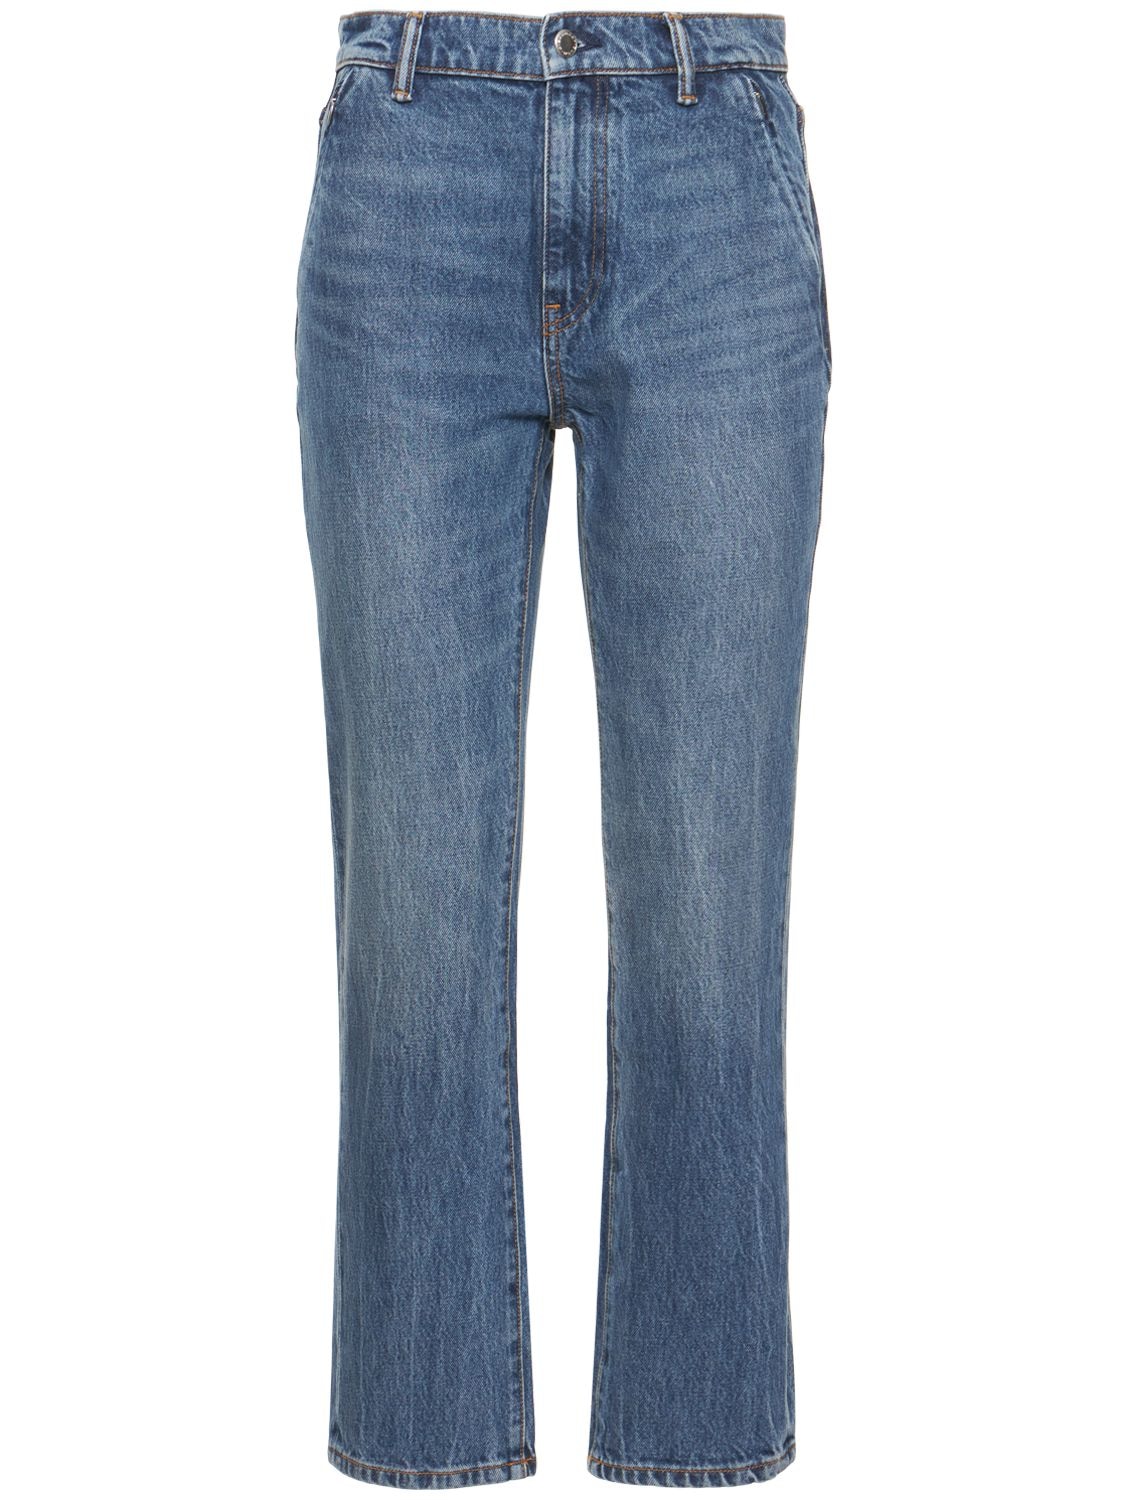 ALEXANDER WANG High-rise Cotton Stovepipe Jeans